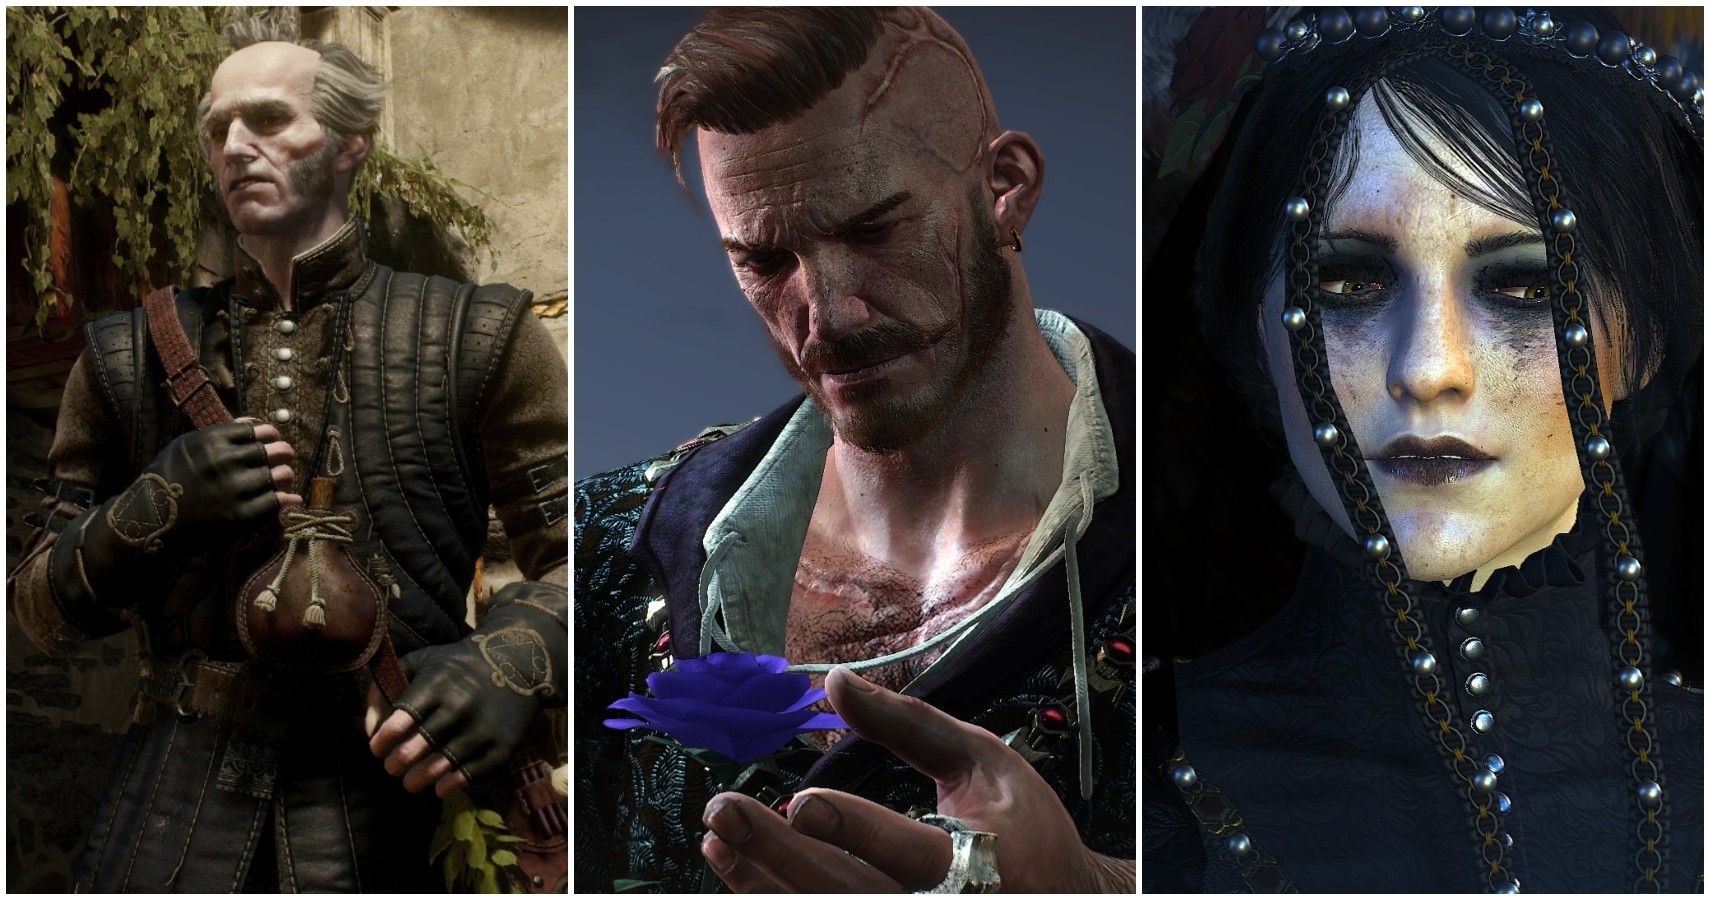 The Witcher 3: 10 Best Characters From The DLCs, Ranked